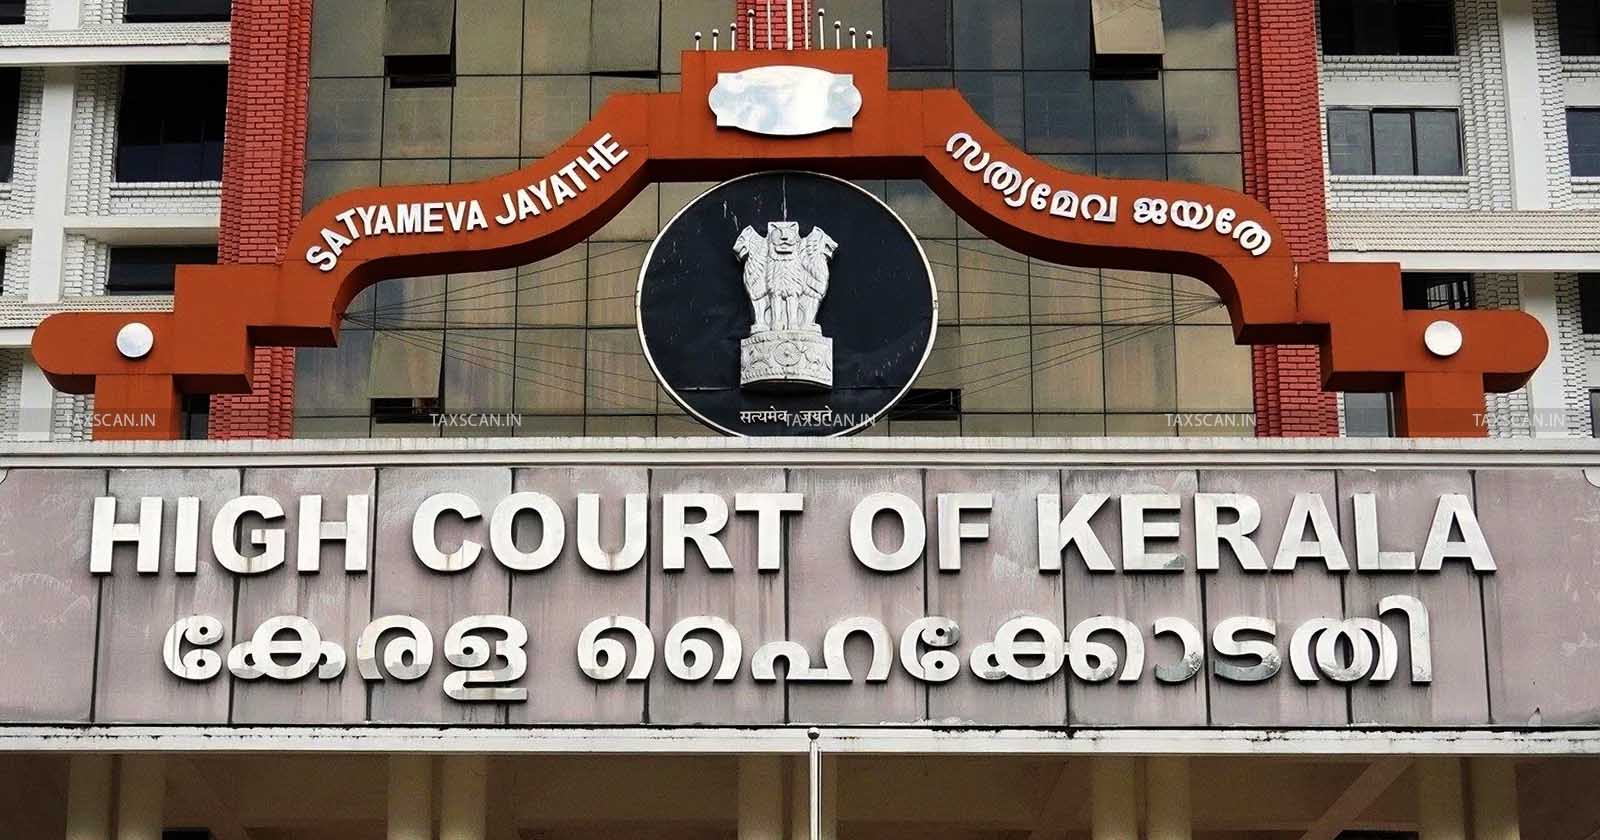 Kerala High Court - statutory appeal - writ petition - Dismissal of writ petition appeal - taxscan